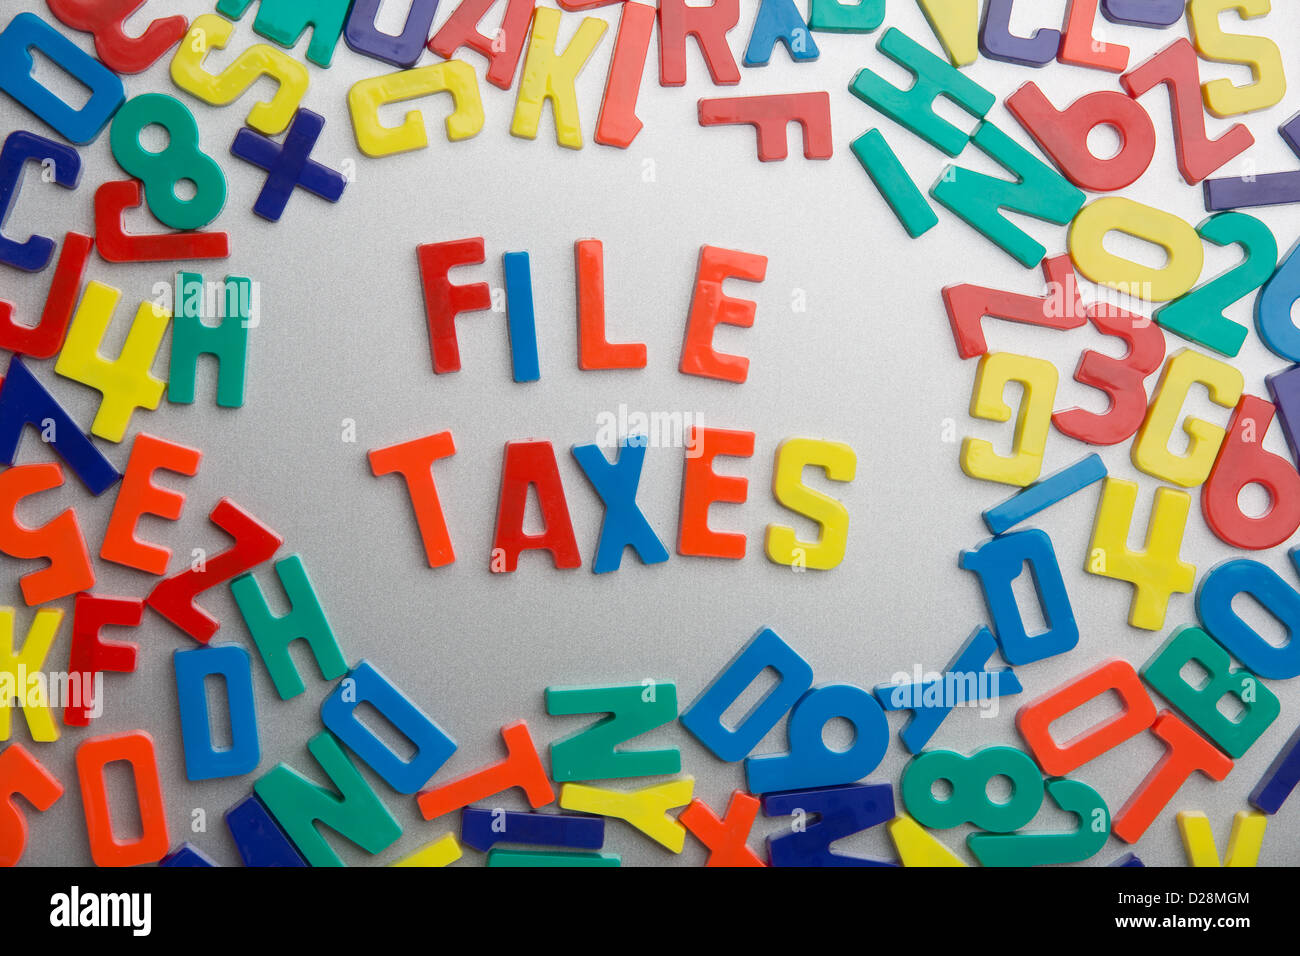 'File Taxes' - Refrigerator magnets spell a message out of a jumble of letters Stock Photo